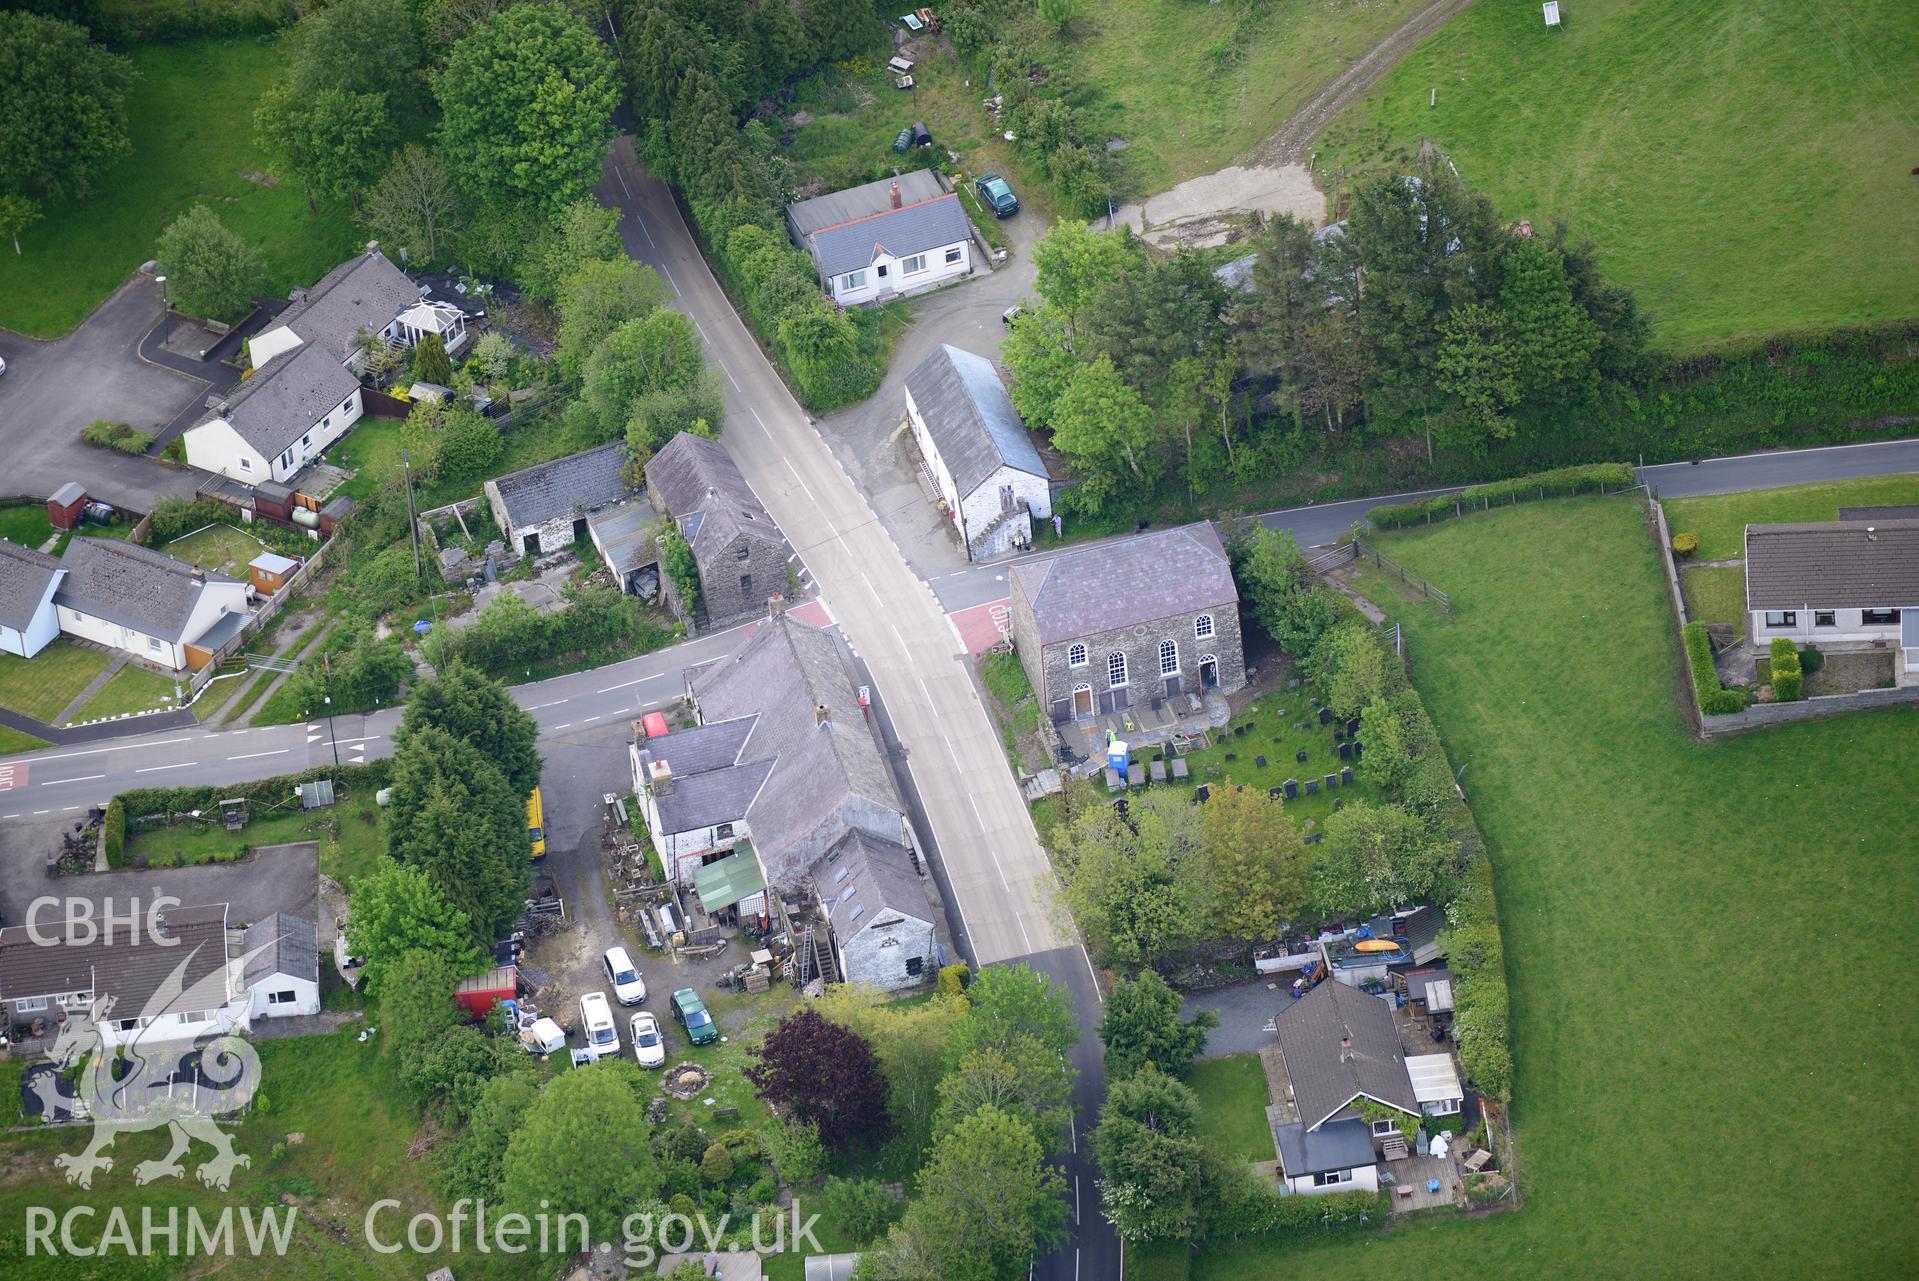 The village of Rhydowen, showing Yr Hen Gapel; Allyrodyn Arms and Alltyrodyn Arms pigsty and stable. Oblique aerial photograph taken during the Royal Commission's programme of archaeological aerial reconnaissance by Toby Driver on 3rd June 2015.